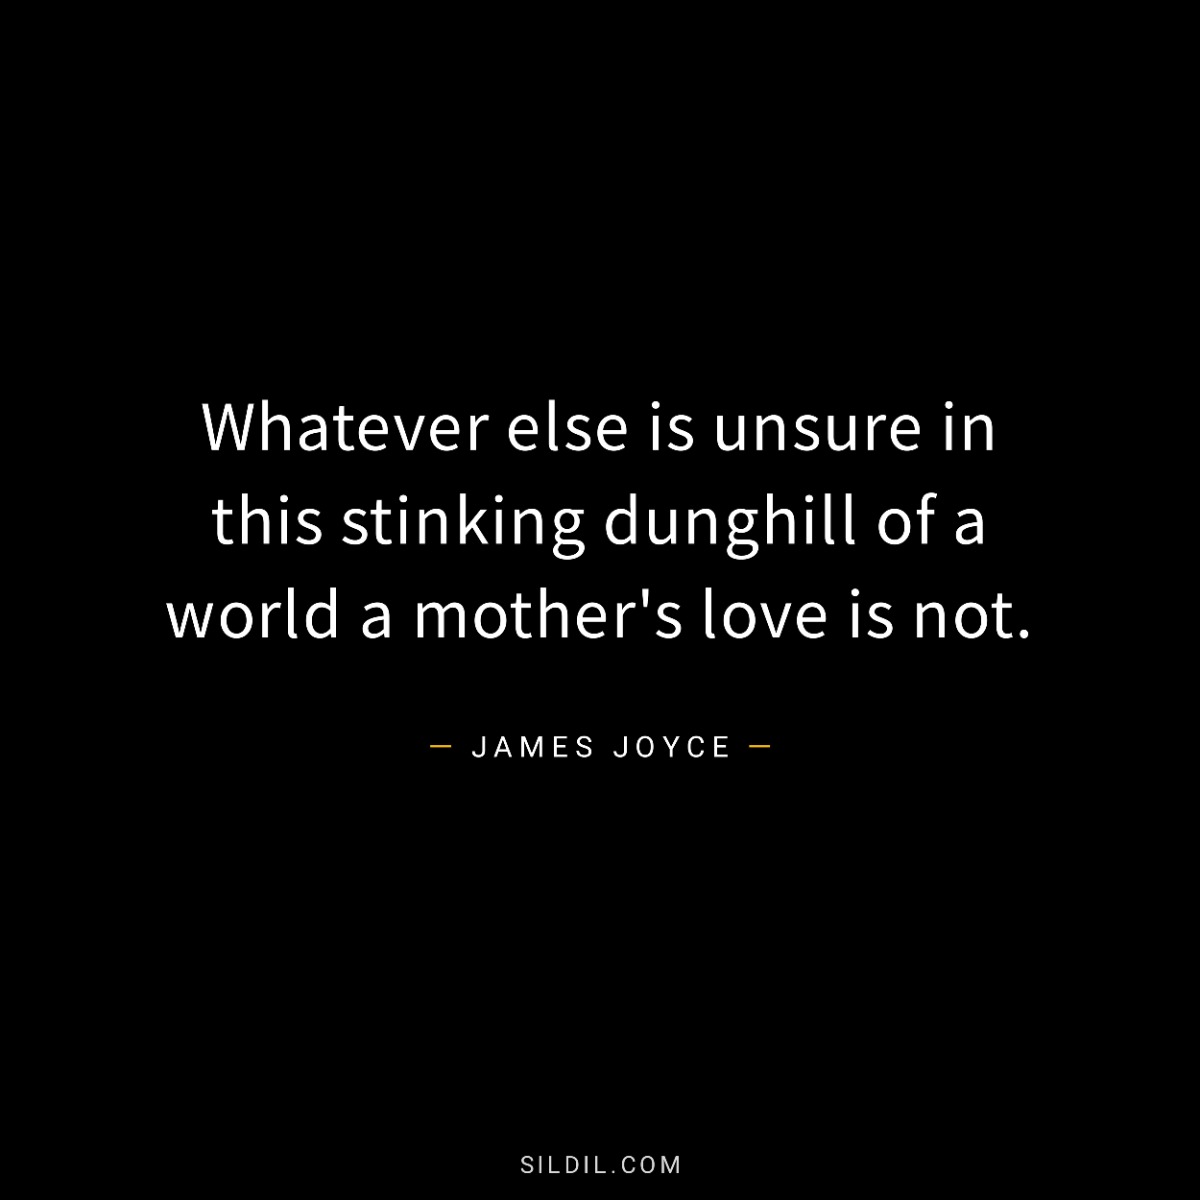 Whatever else is unsure in this stinking dunghill of a world a mother's love is not.